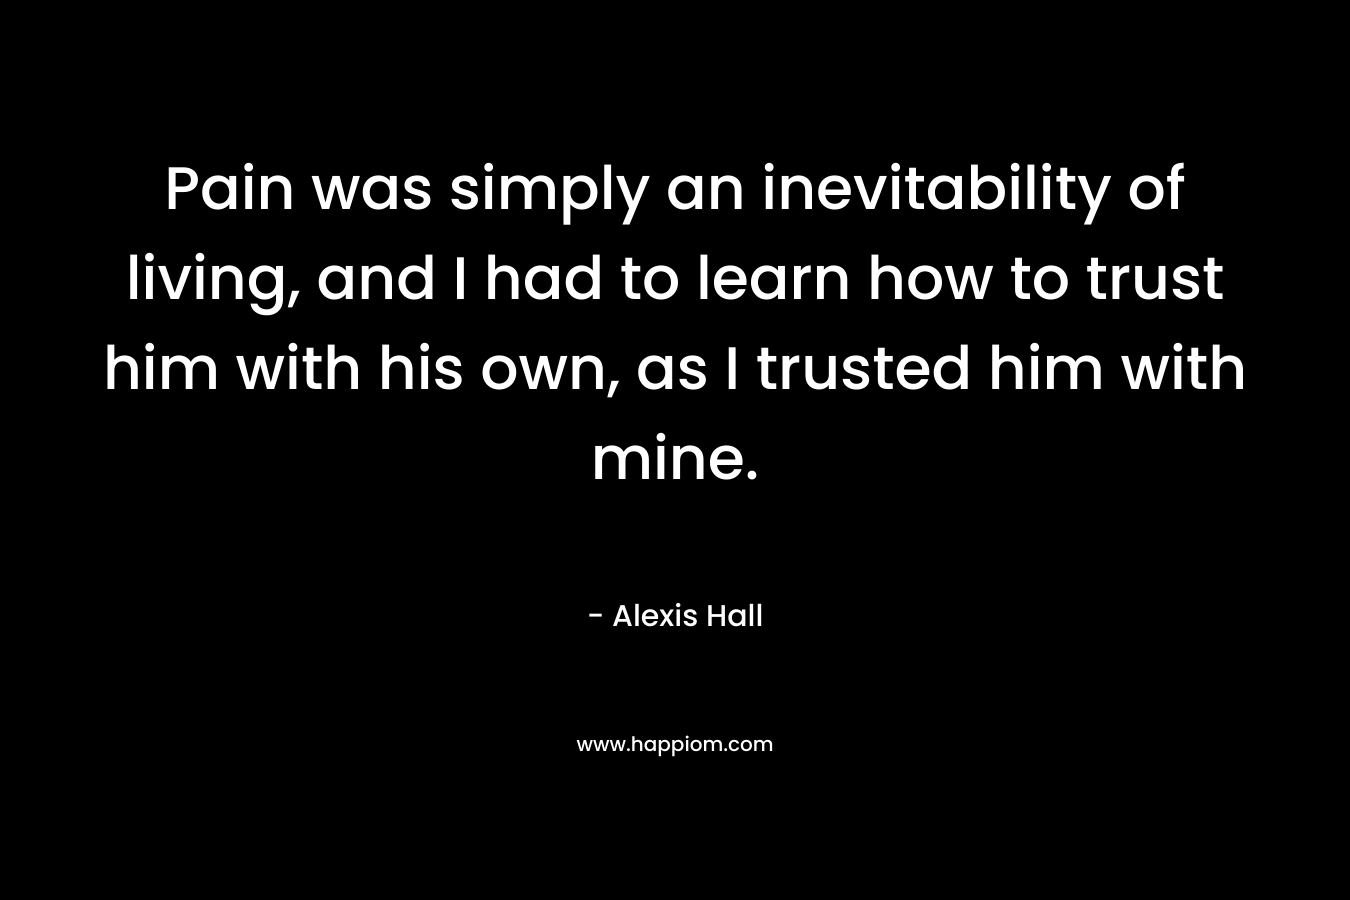 Pain was simply an inevitability of living, and I had to learn how to trust him with his own, as I trusted him with mine.